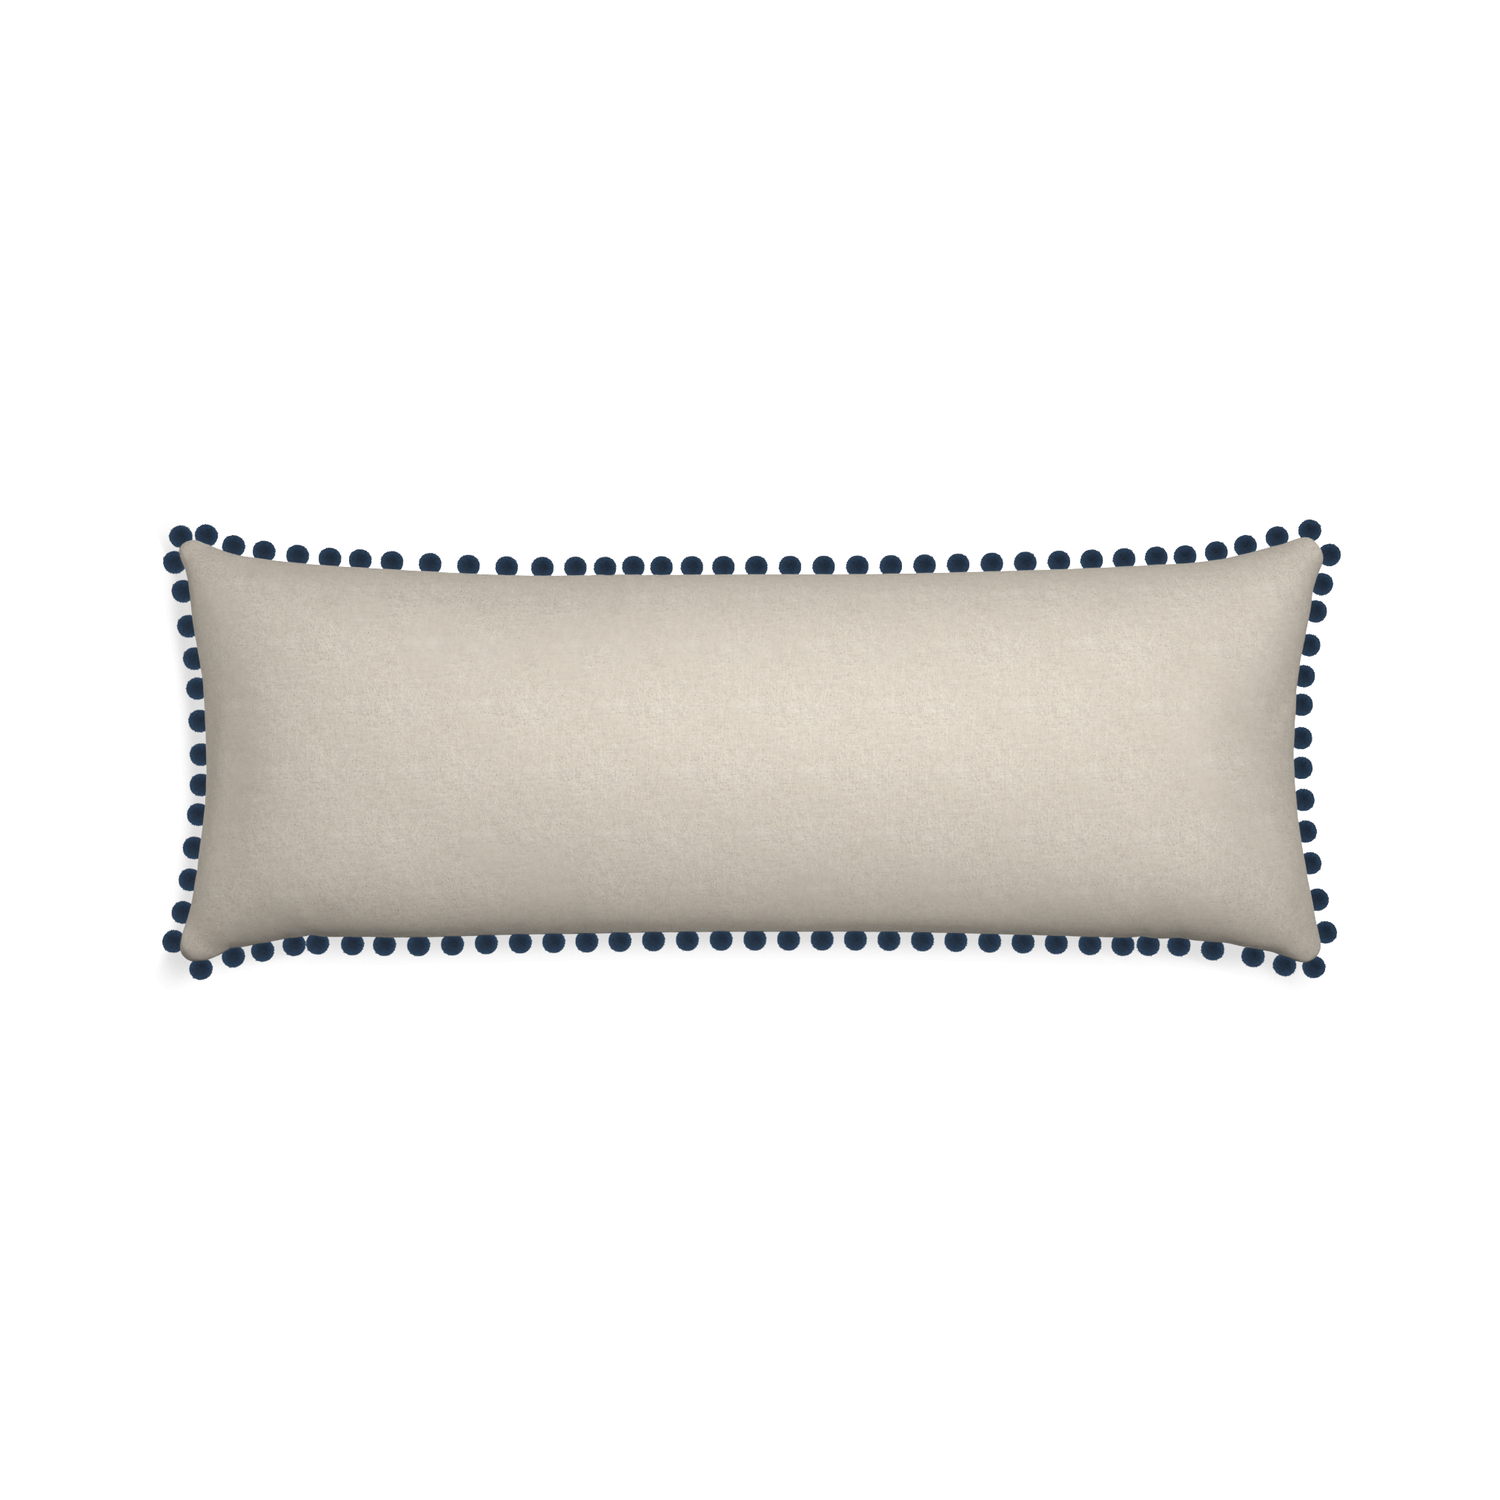 Xl-lumbar oat custom light brownpillow with c on white background